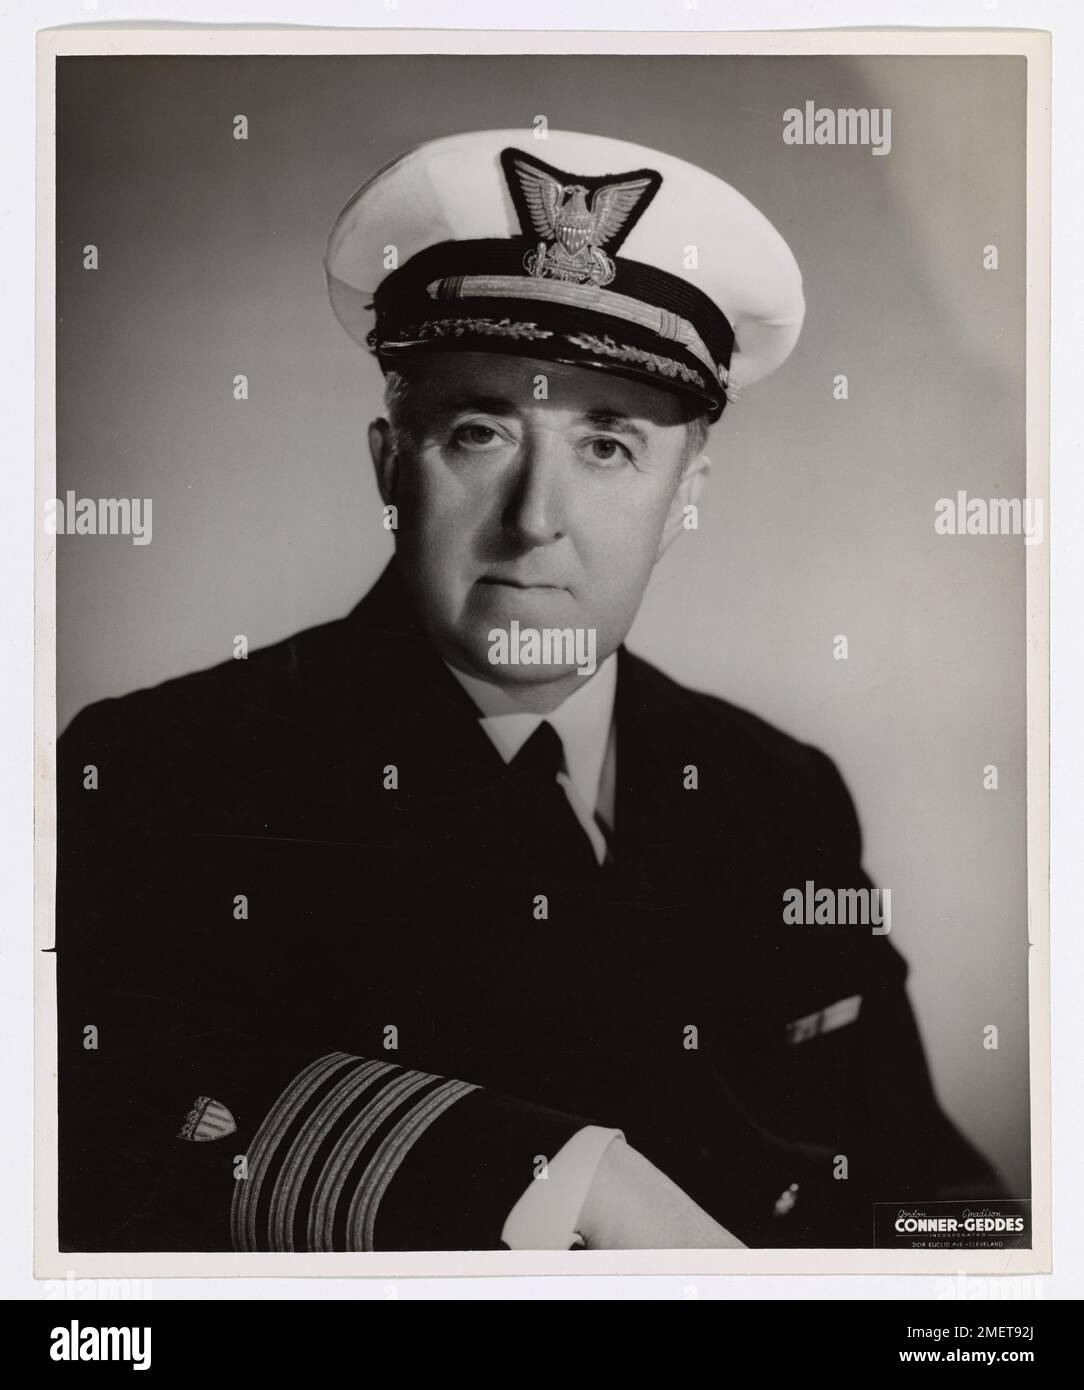 Rear Admiral Ralph W. Dempwolf. Rear Admiral Ralph W. Dempwolf U.S. Coast Guard (Retired) as Captain here. Taken before his retirement in 1945. Stock Photo